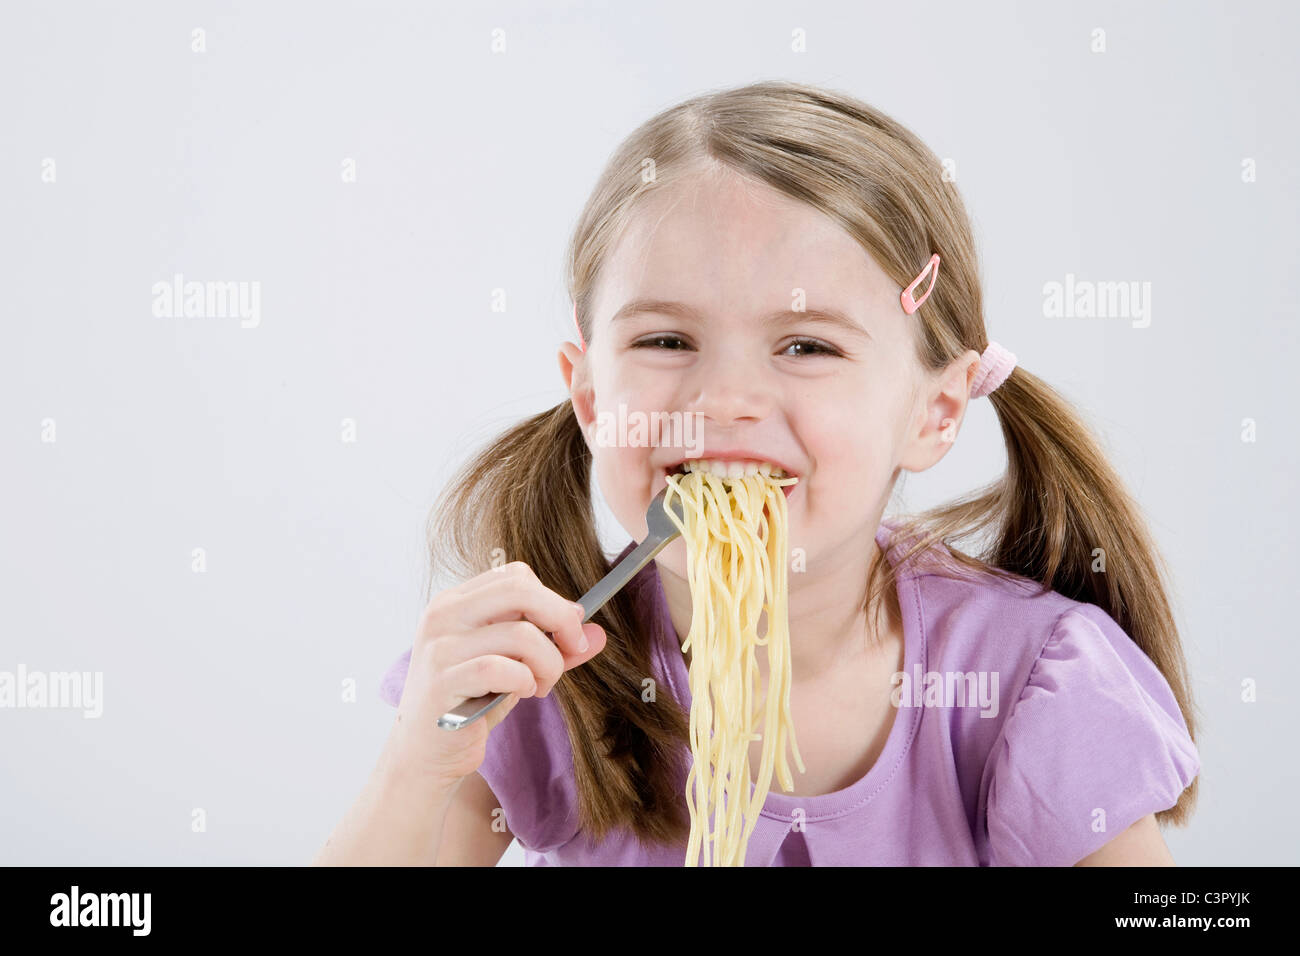 Girl (4-5) eating spaghetti, smiling, portrait Banque D'Images